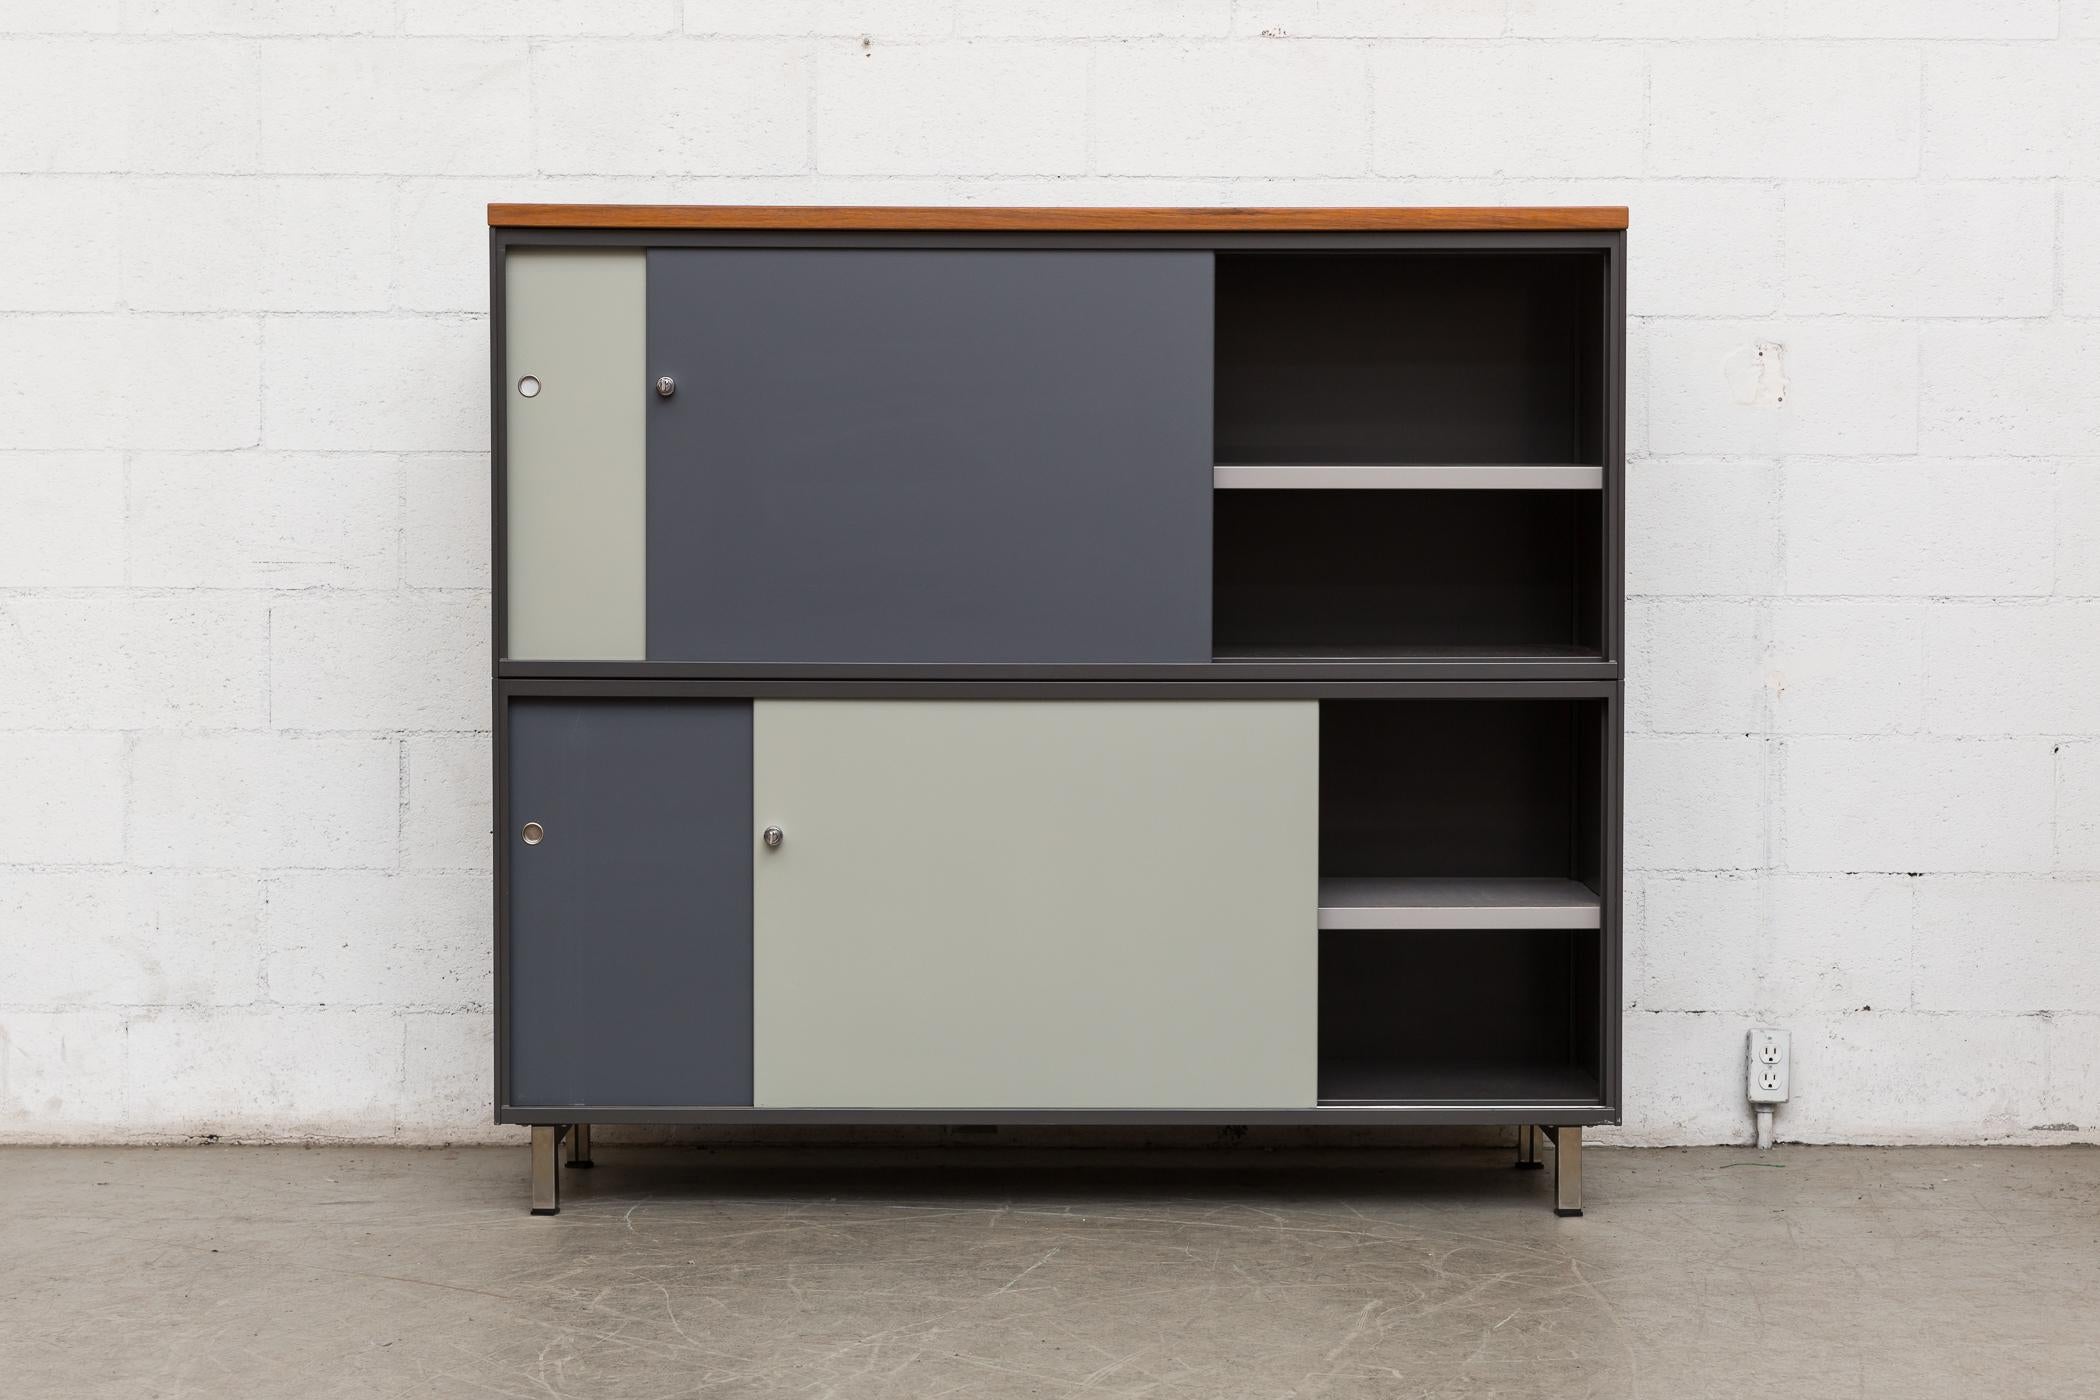 Extra large two-tier Gispen industrial metal cabinet designed with light and dark grey enameled metal doors and keyed locks. Movable shelves inside. Formica top with teak top. Original manufacturers tag. Very good original condition.